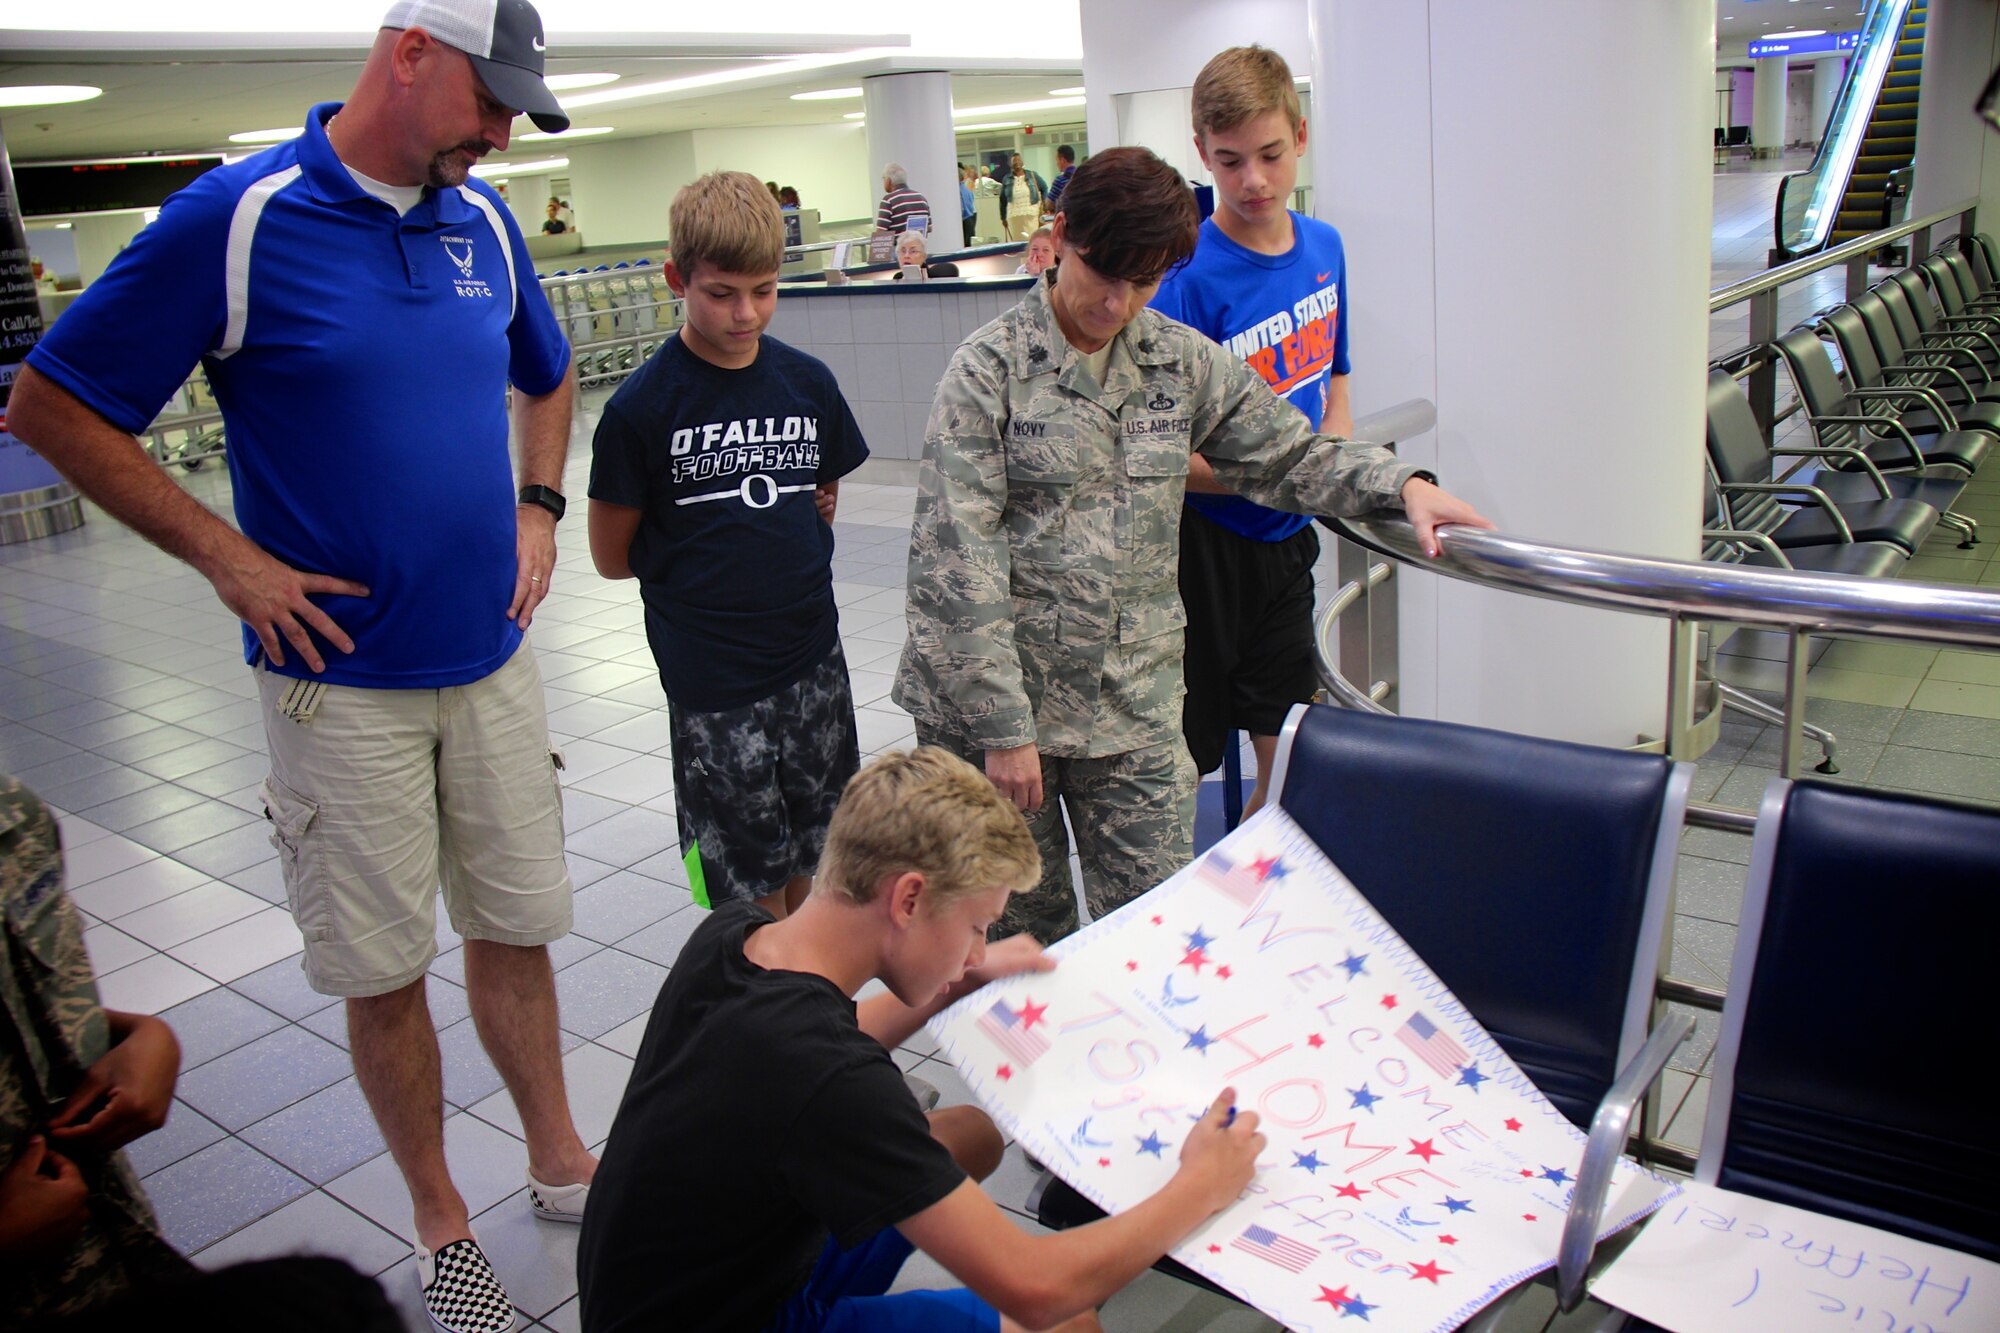 Director of Staff for the 932nd Airlift Wing, Lt. Col. Julie Novy and her family worked behind the scenes to create welcome home posters for an Airman returning from an overseas deployment.  The surprise visit to the airport amazed the unit member and was appreciated by his parents who witnessed the outpouring of support.  (U.S. Air Force photo by Lt. Col. Stan Paregien)